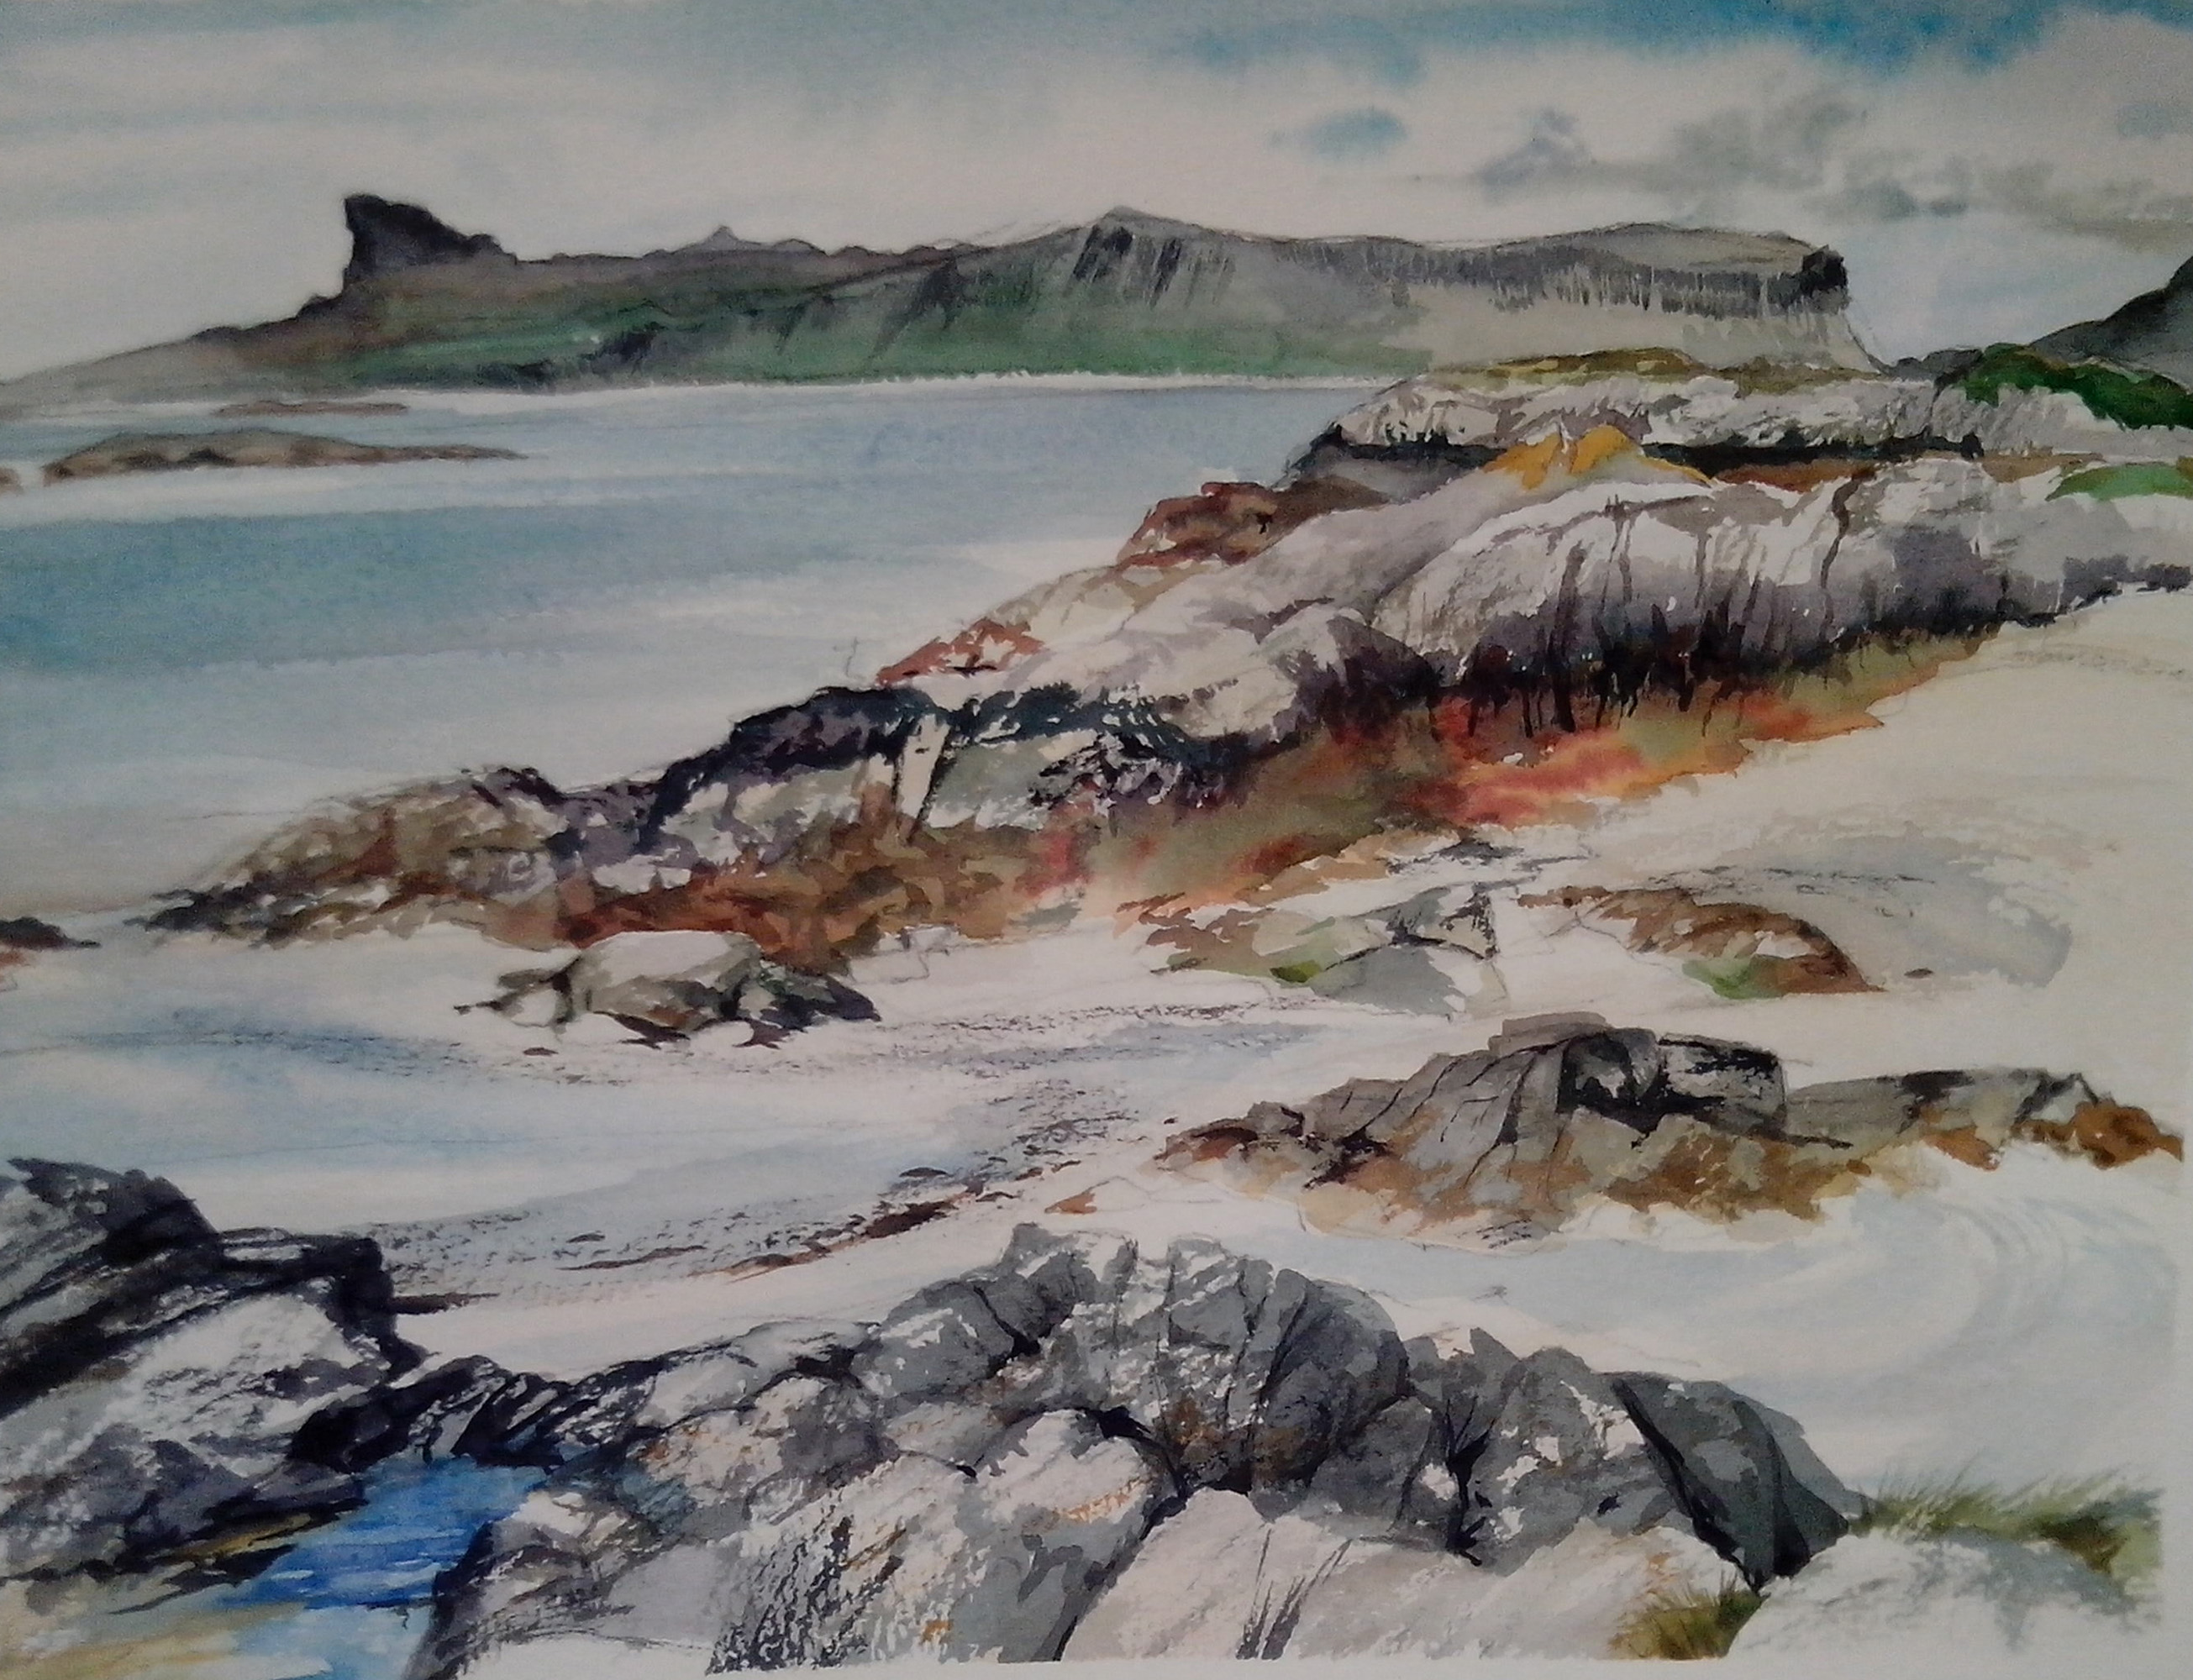 'On the Edge - Eigg' by artist Catherine King